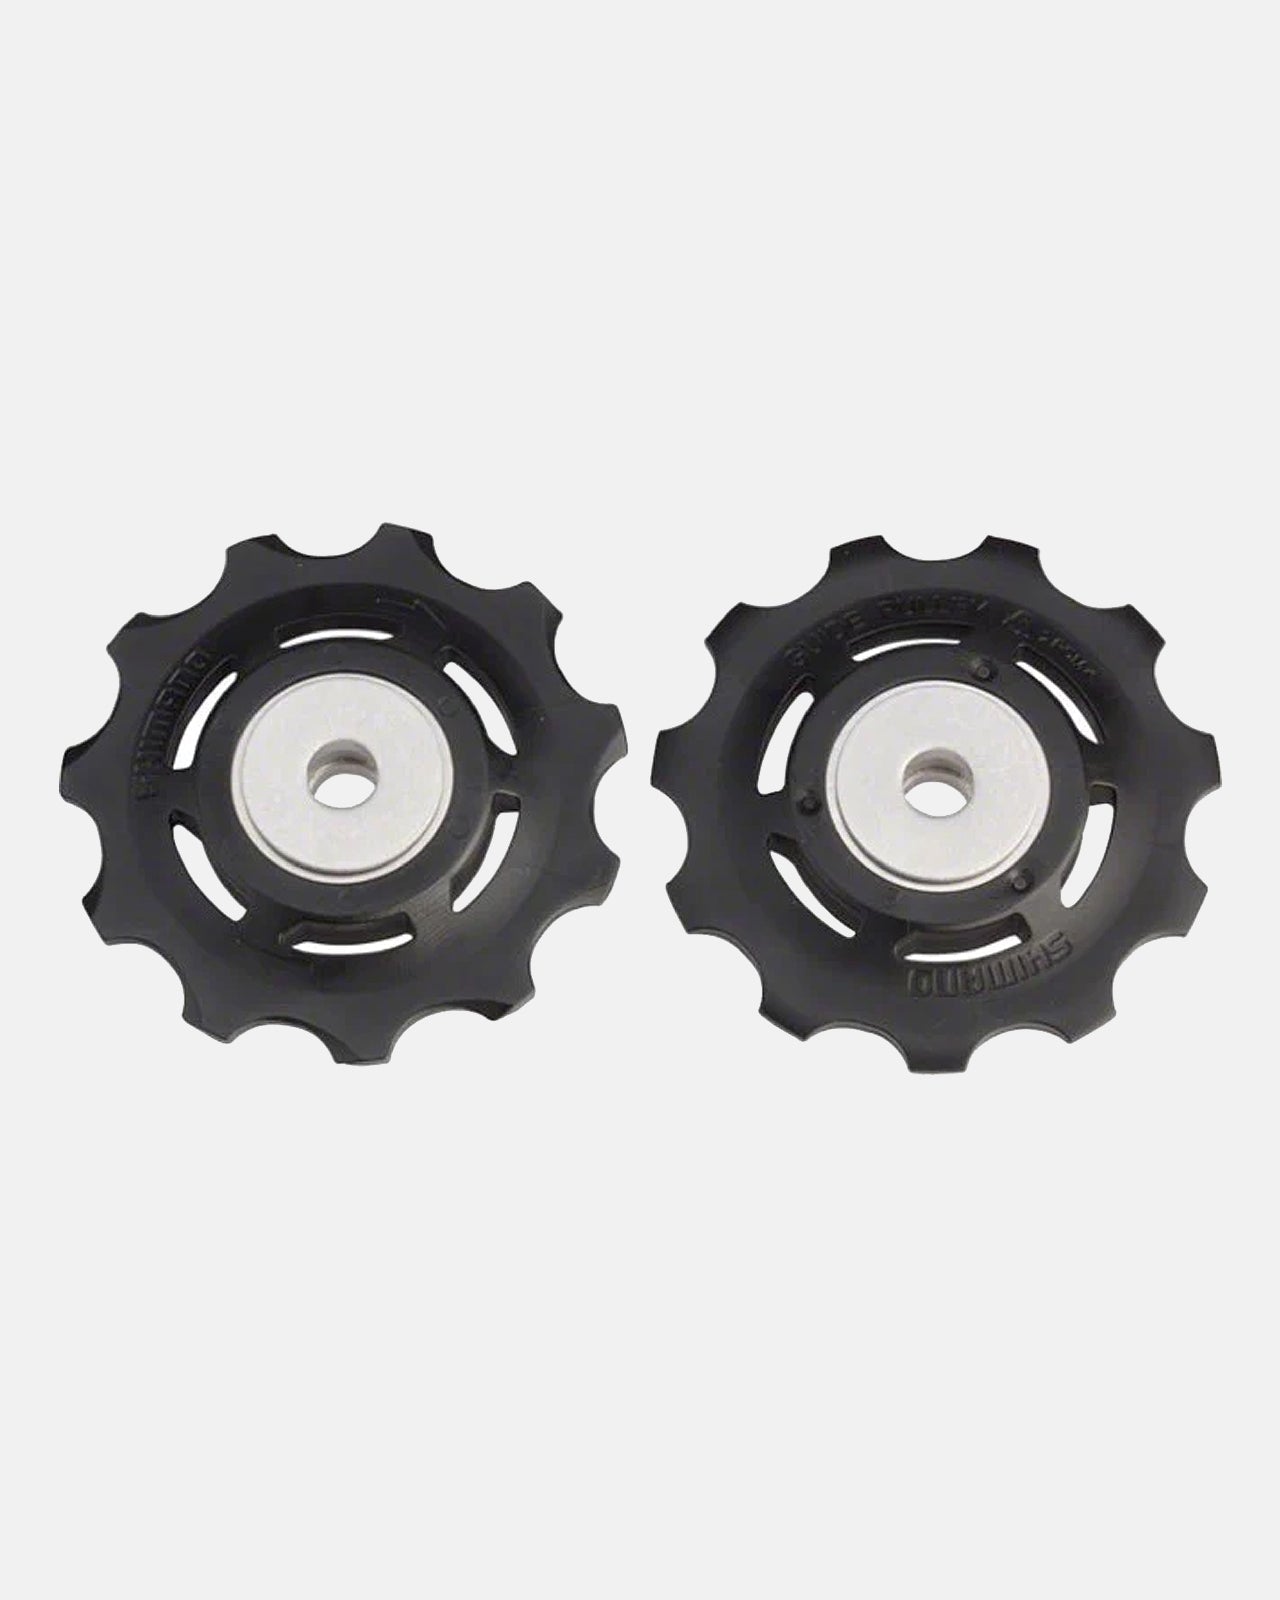 Shimano RD-6800 & RD-6870 Pulley Set | Enroute.cc